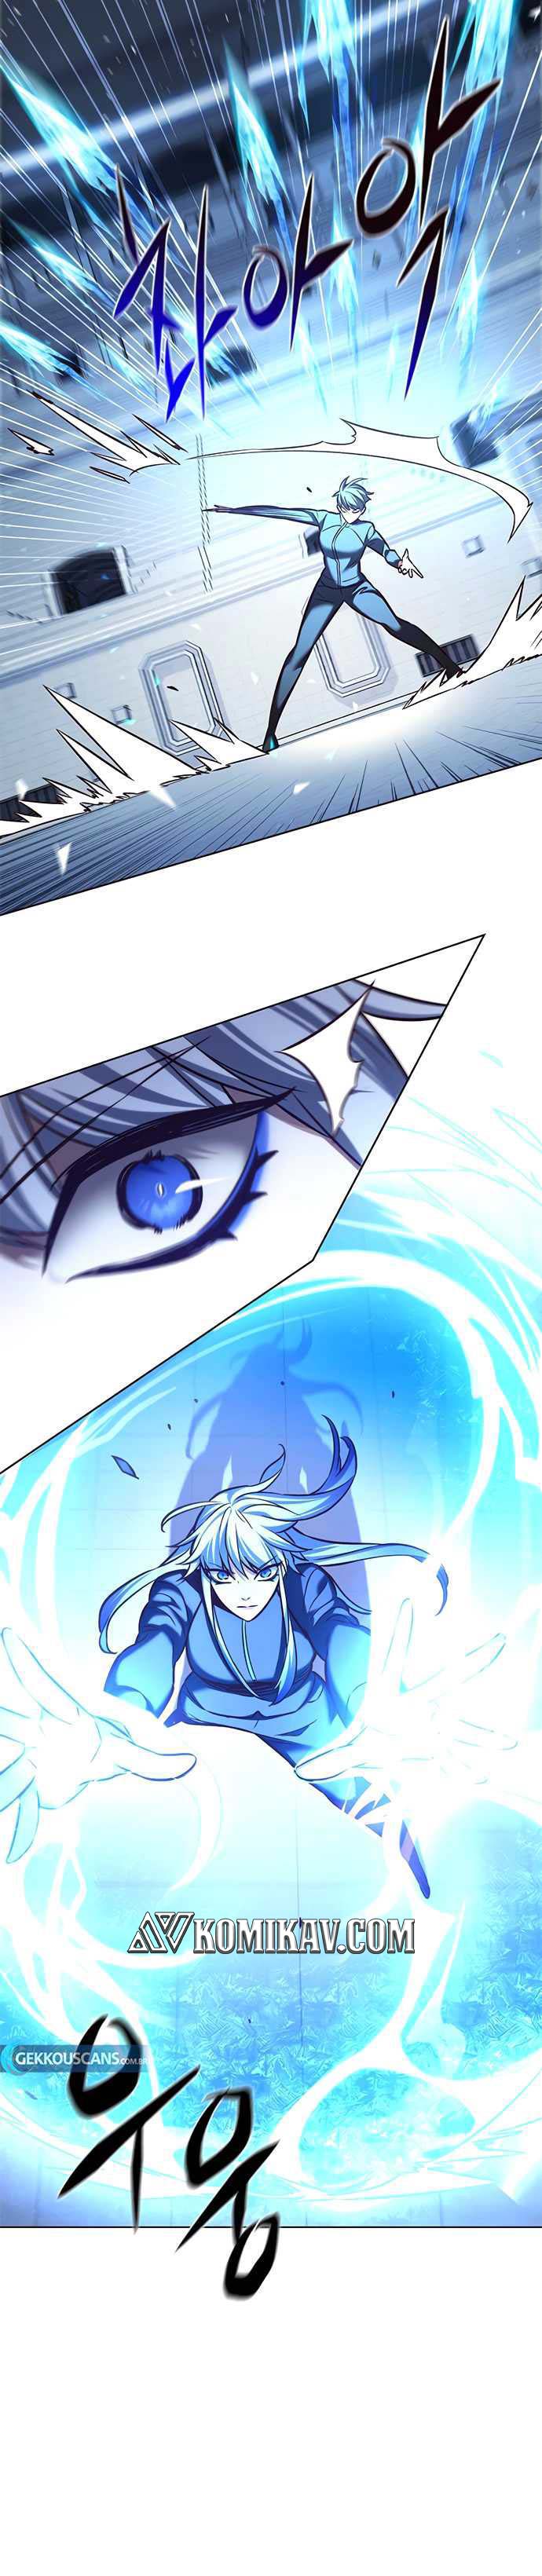 Eleceed Chapter 206